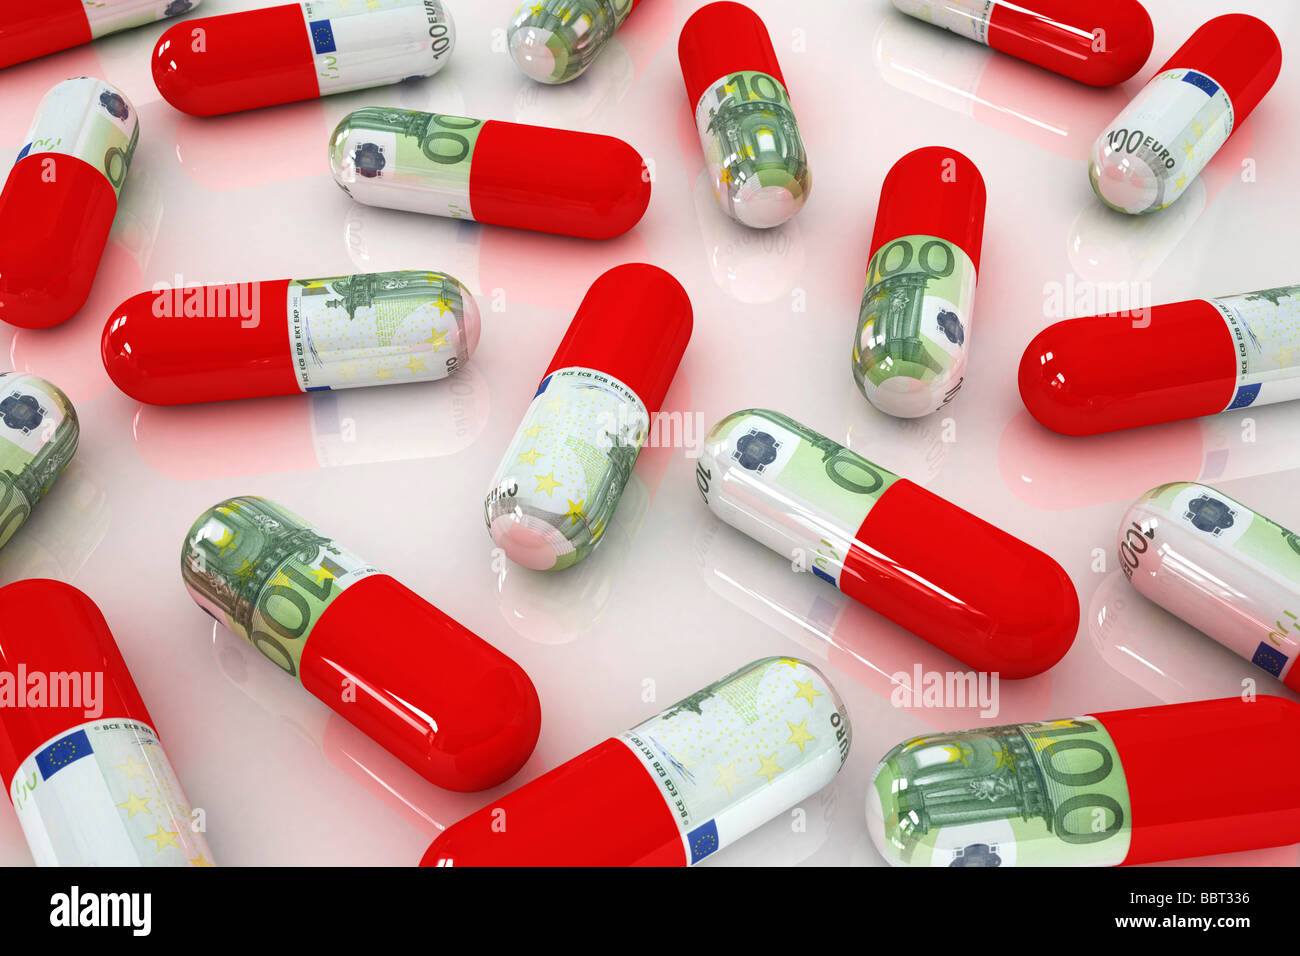 Expensive medicine, concept illustration of rising health care costs Stock Photo